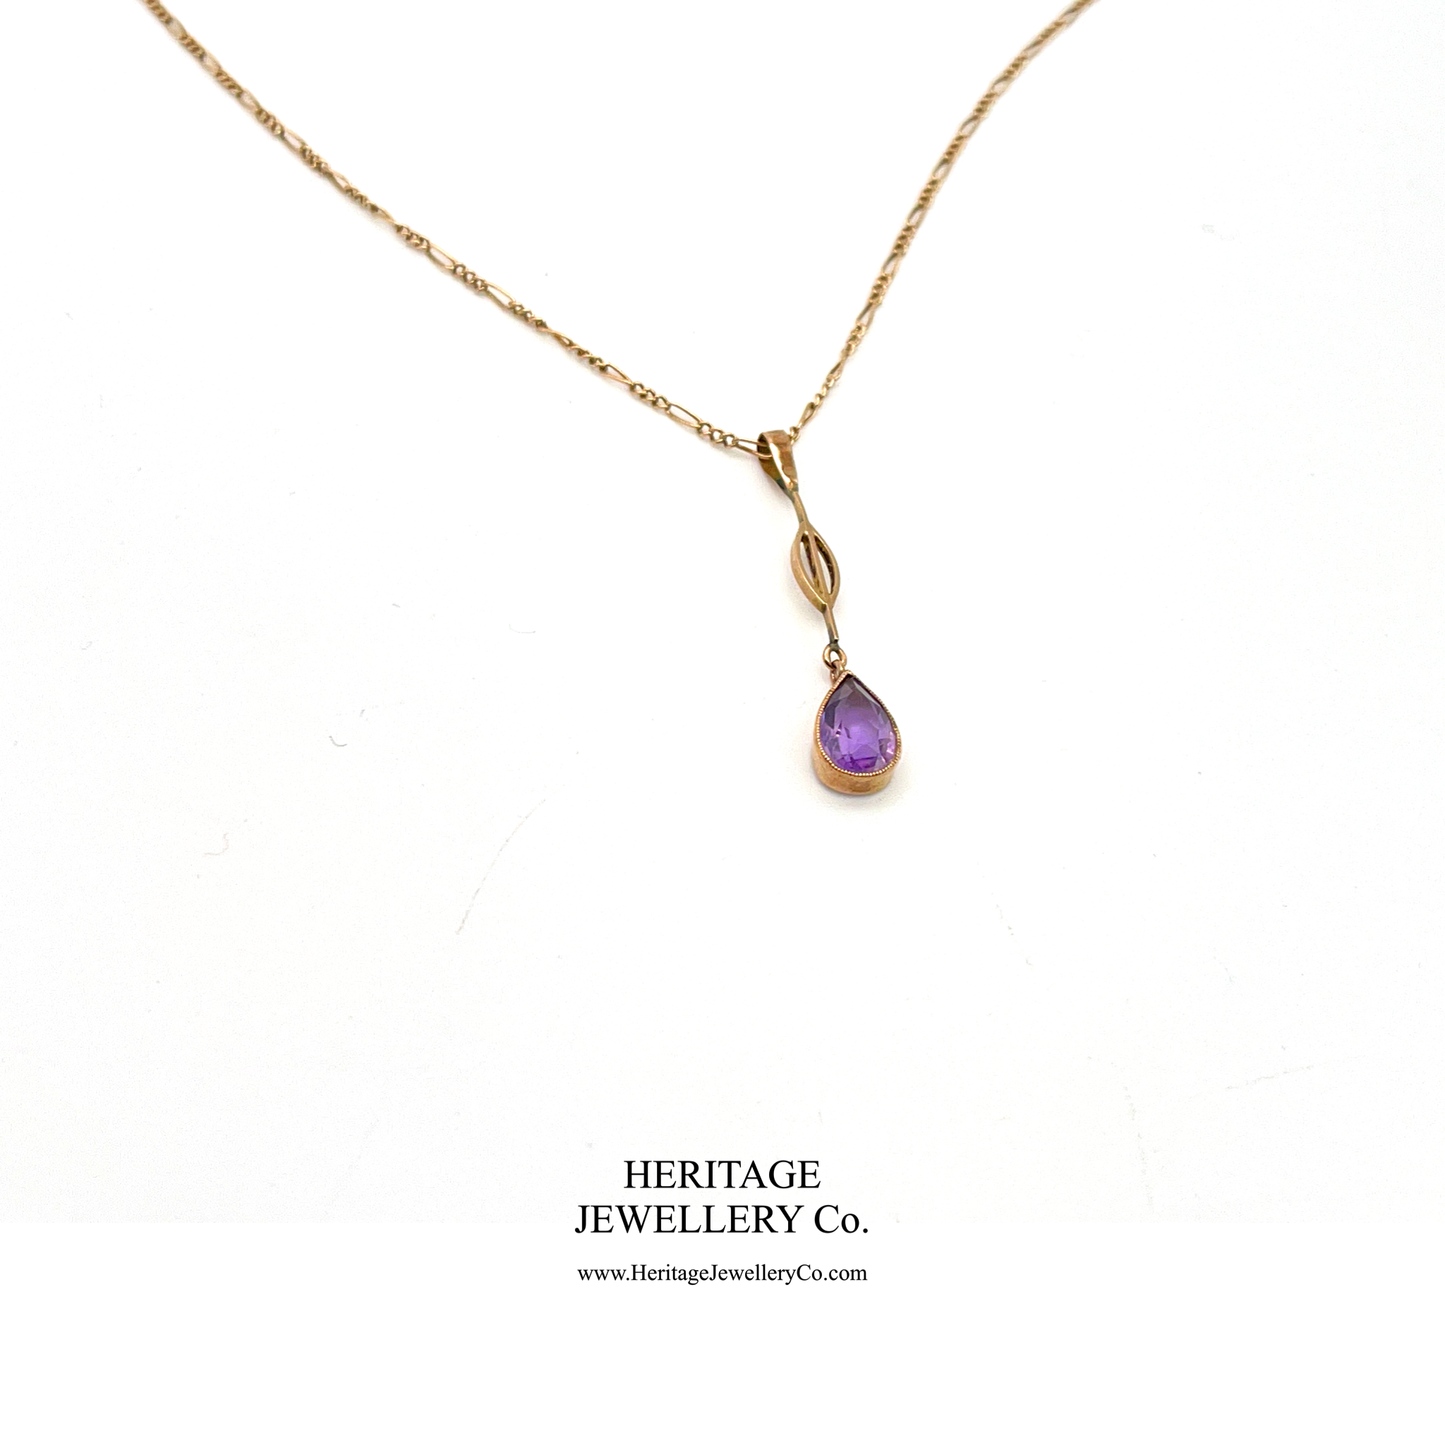 Antique Rose Gold and Amethyst Pendant